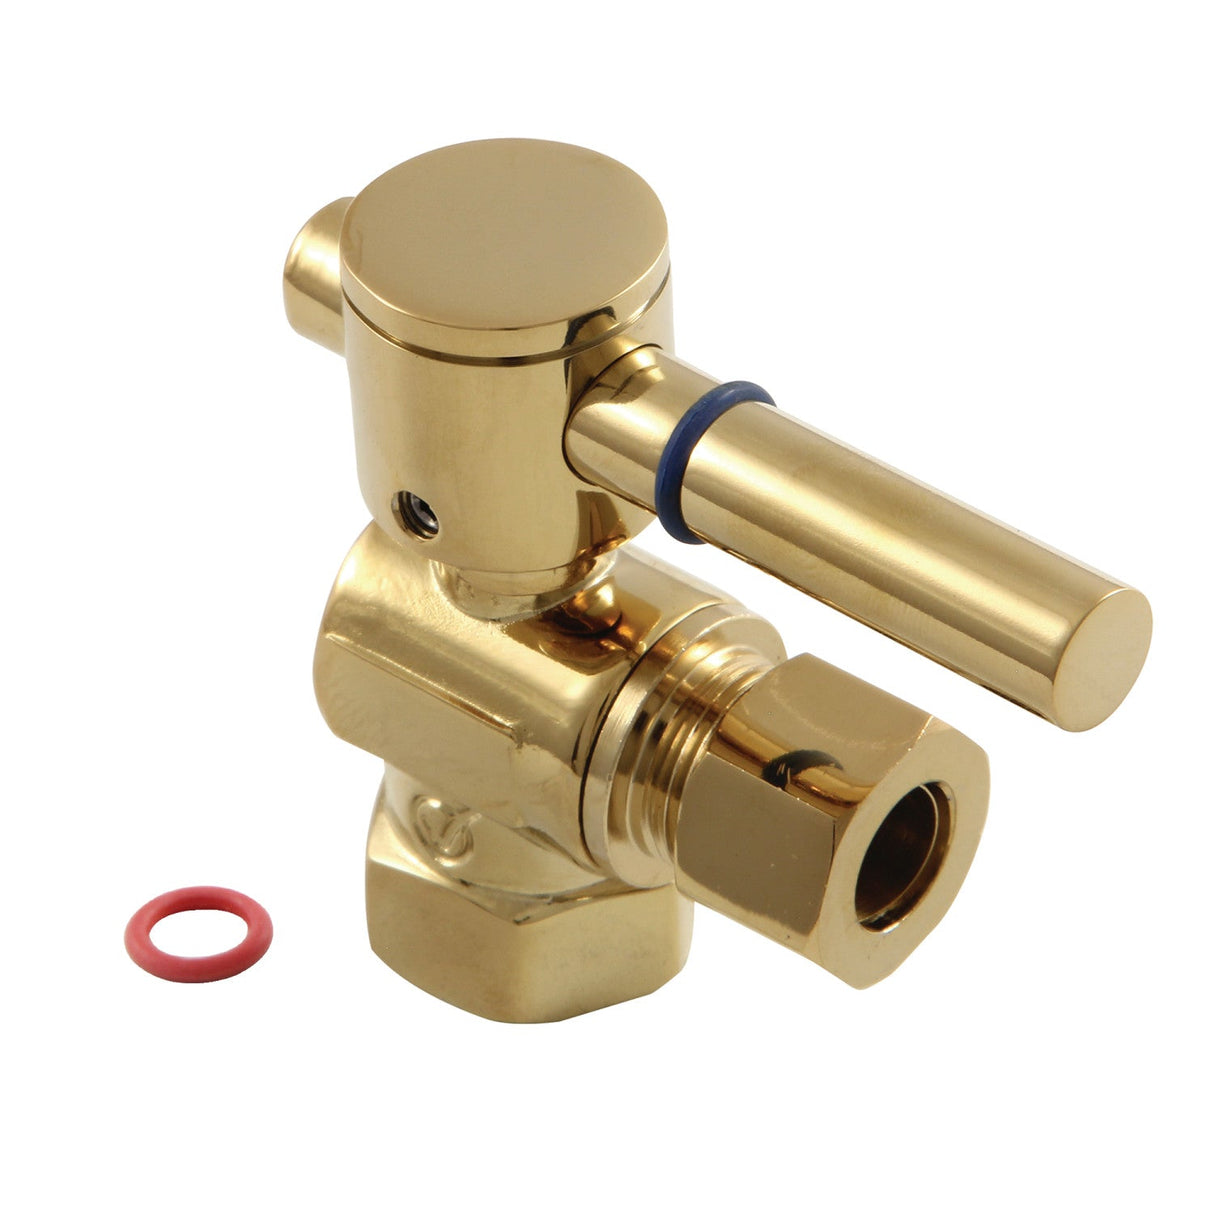 Concord CC33102DL 3/8-Inch FIP x 3/8-Inch OD Comp Quarter-Turn Angle Stop Valve, Polished Brass